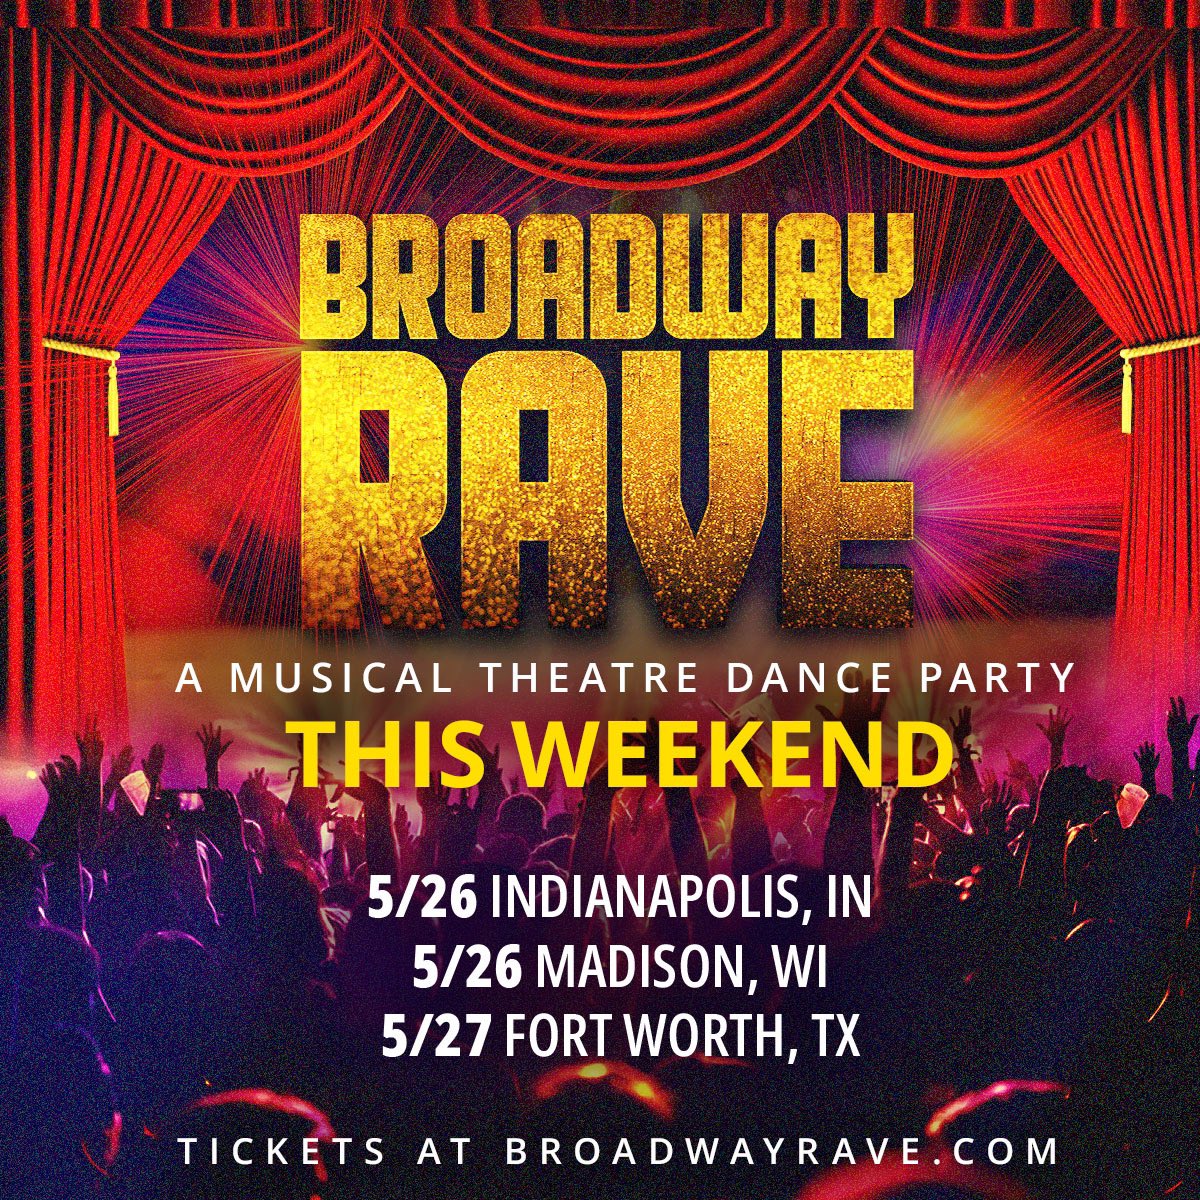 kickoff your 3 day weekend in style with us at Broadway rave. Tickets linked in bio!